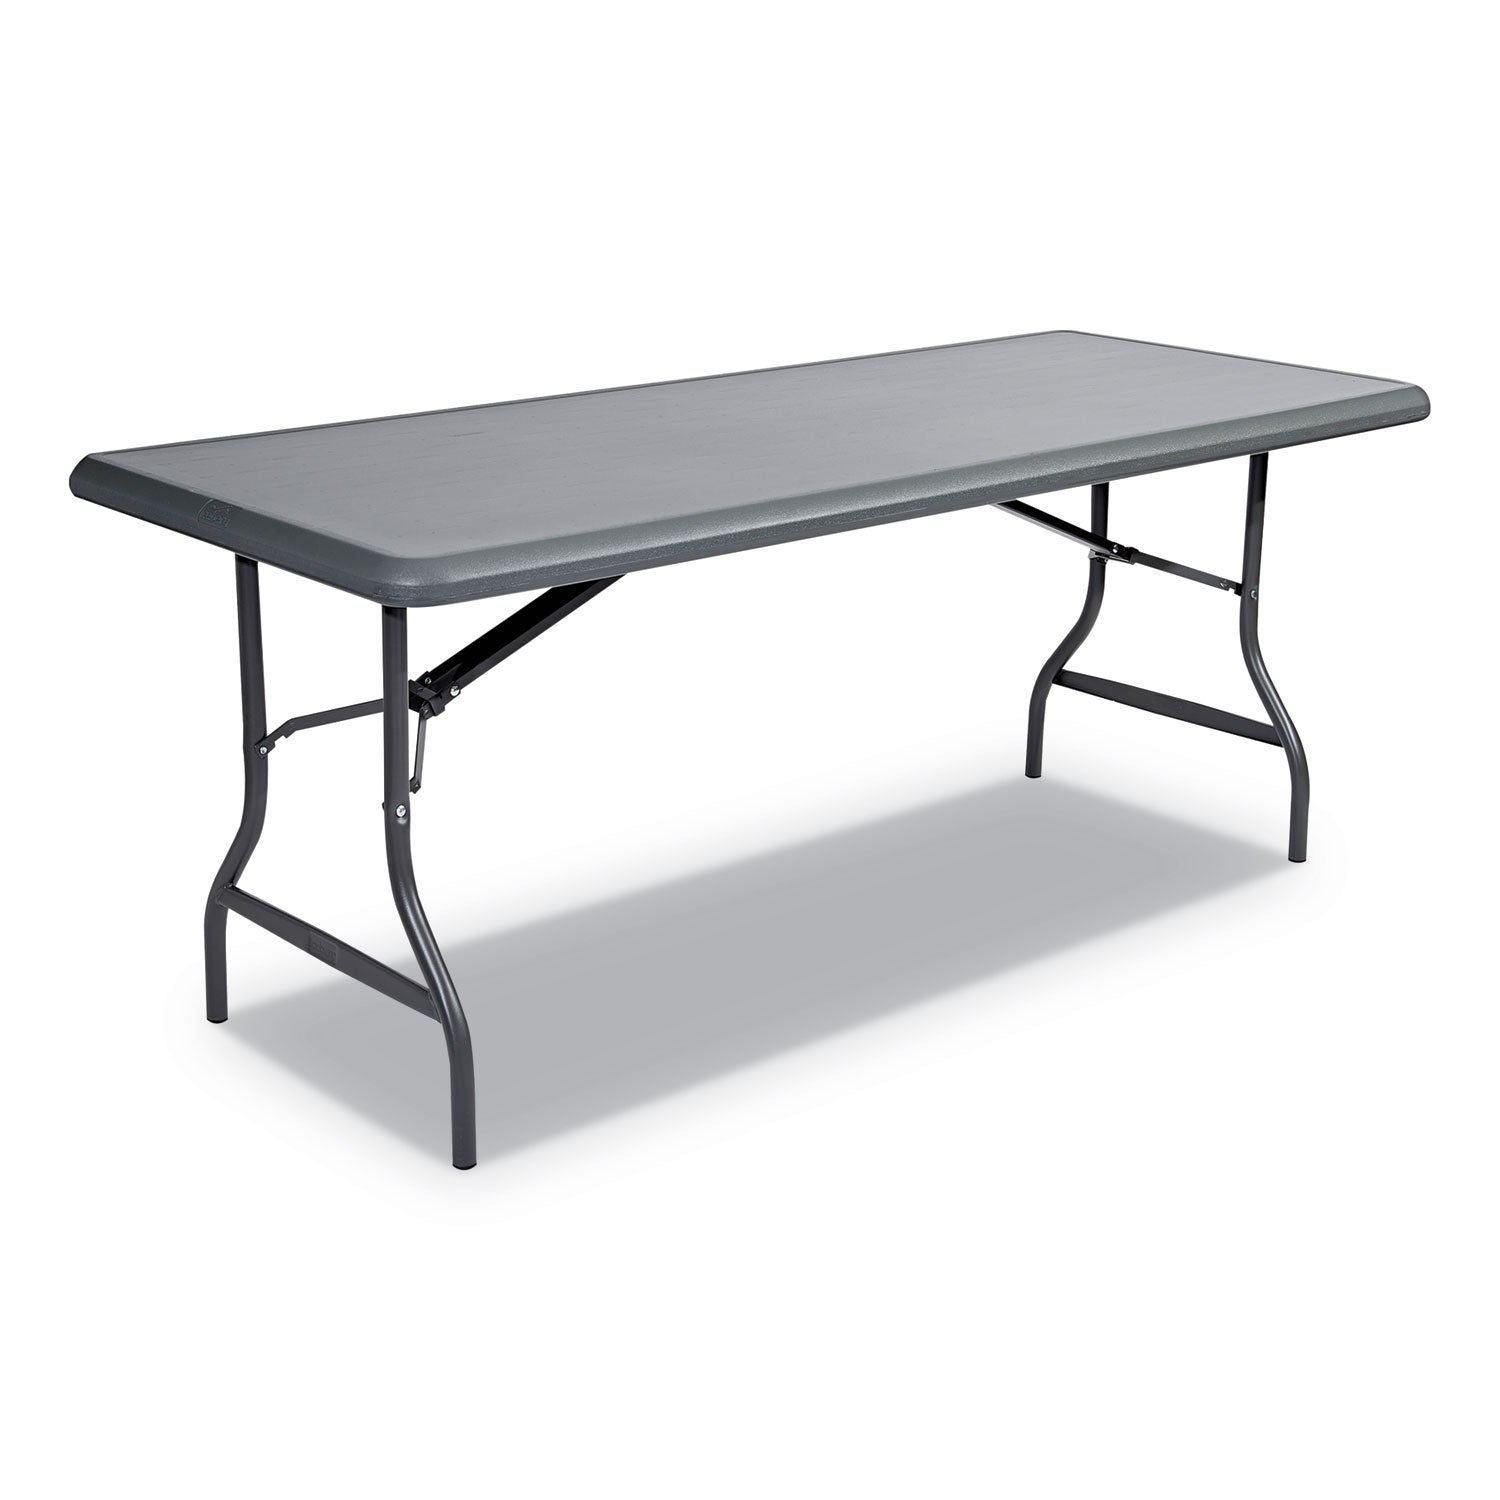 IndestrucTable Industrial Folding Table, Rectangular, 72" x 30" x 29", Charcoal - 1